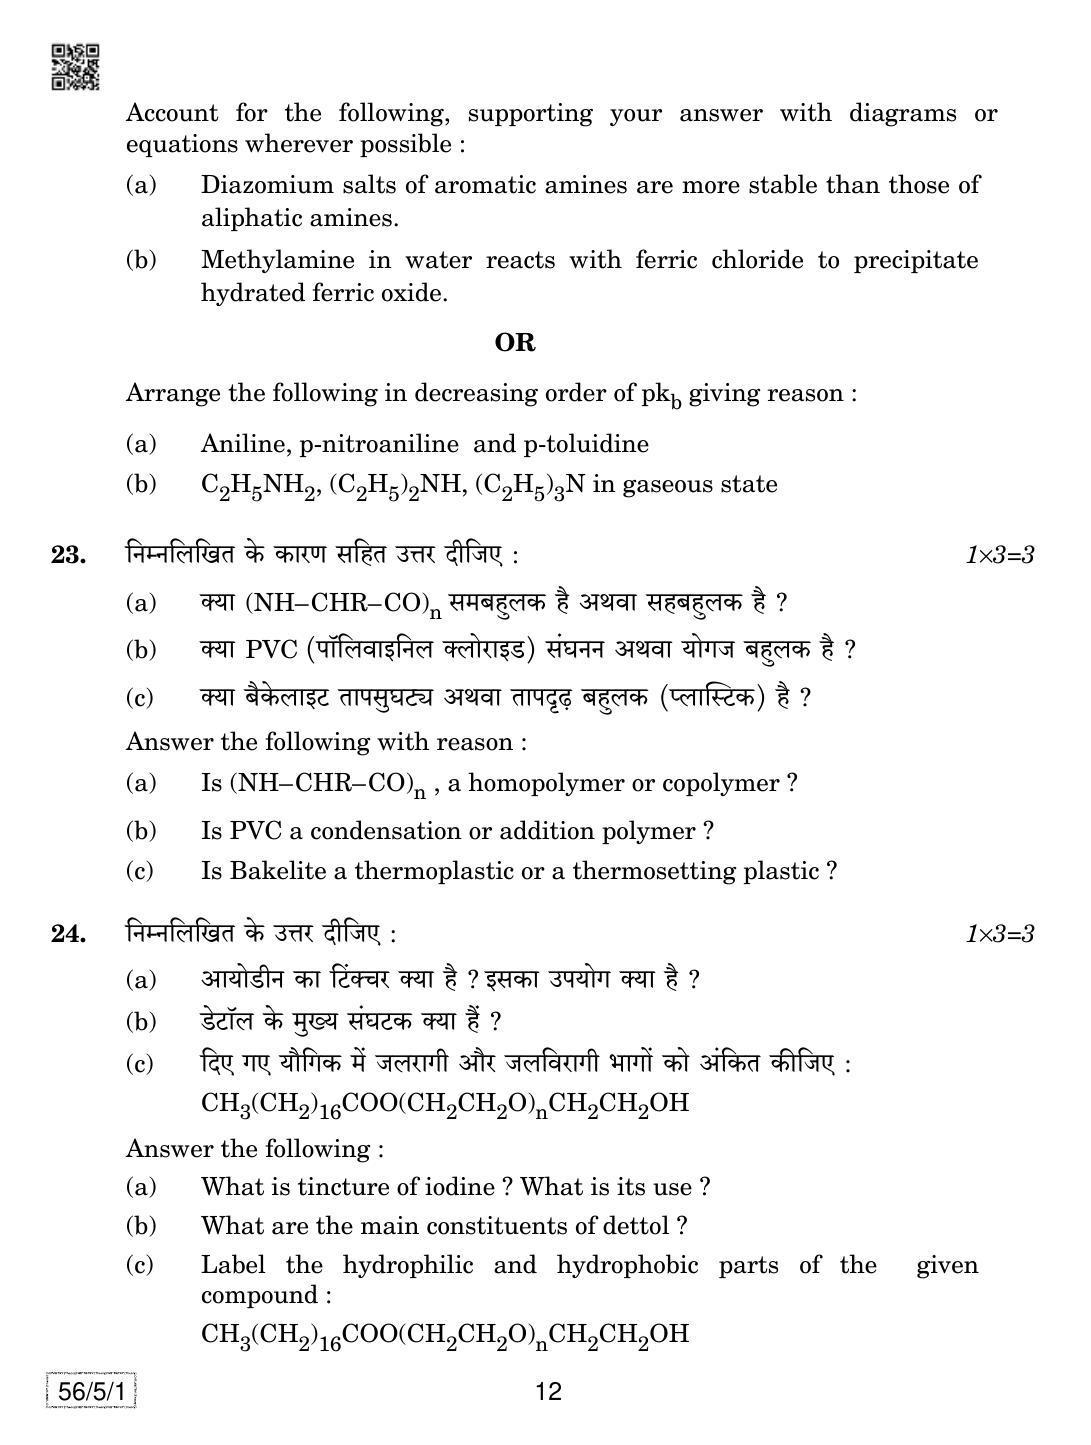 CBSE Class 12 56-5-1 Chemistry 2019 Question Paper - Page 12